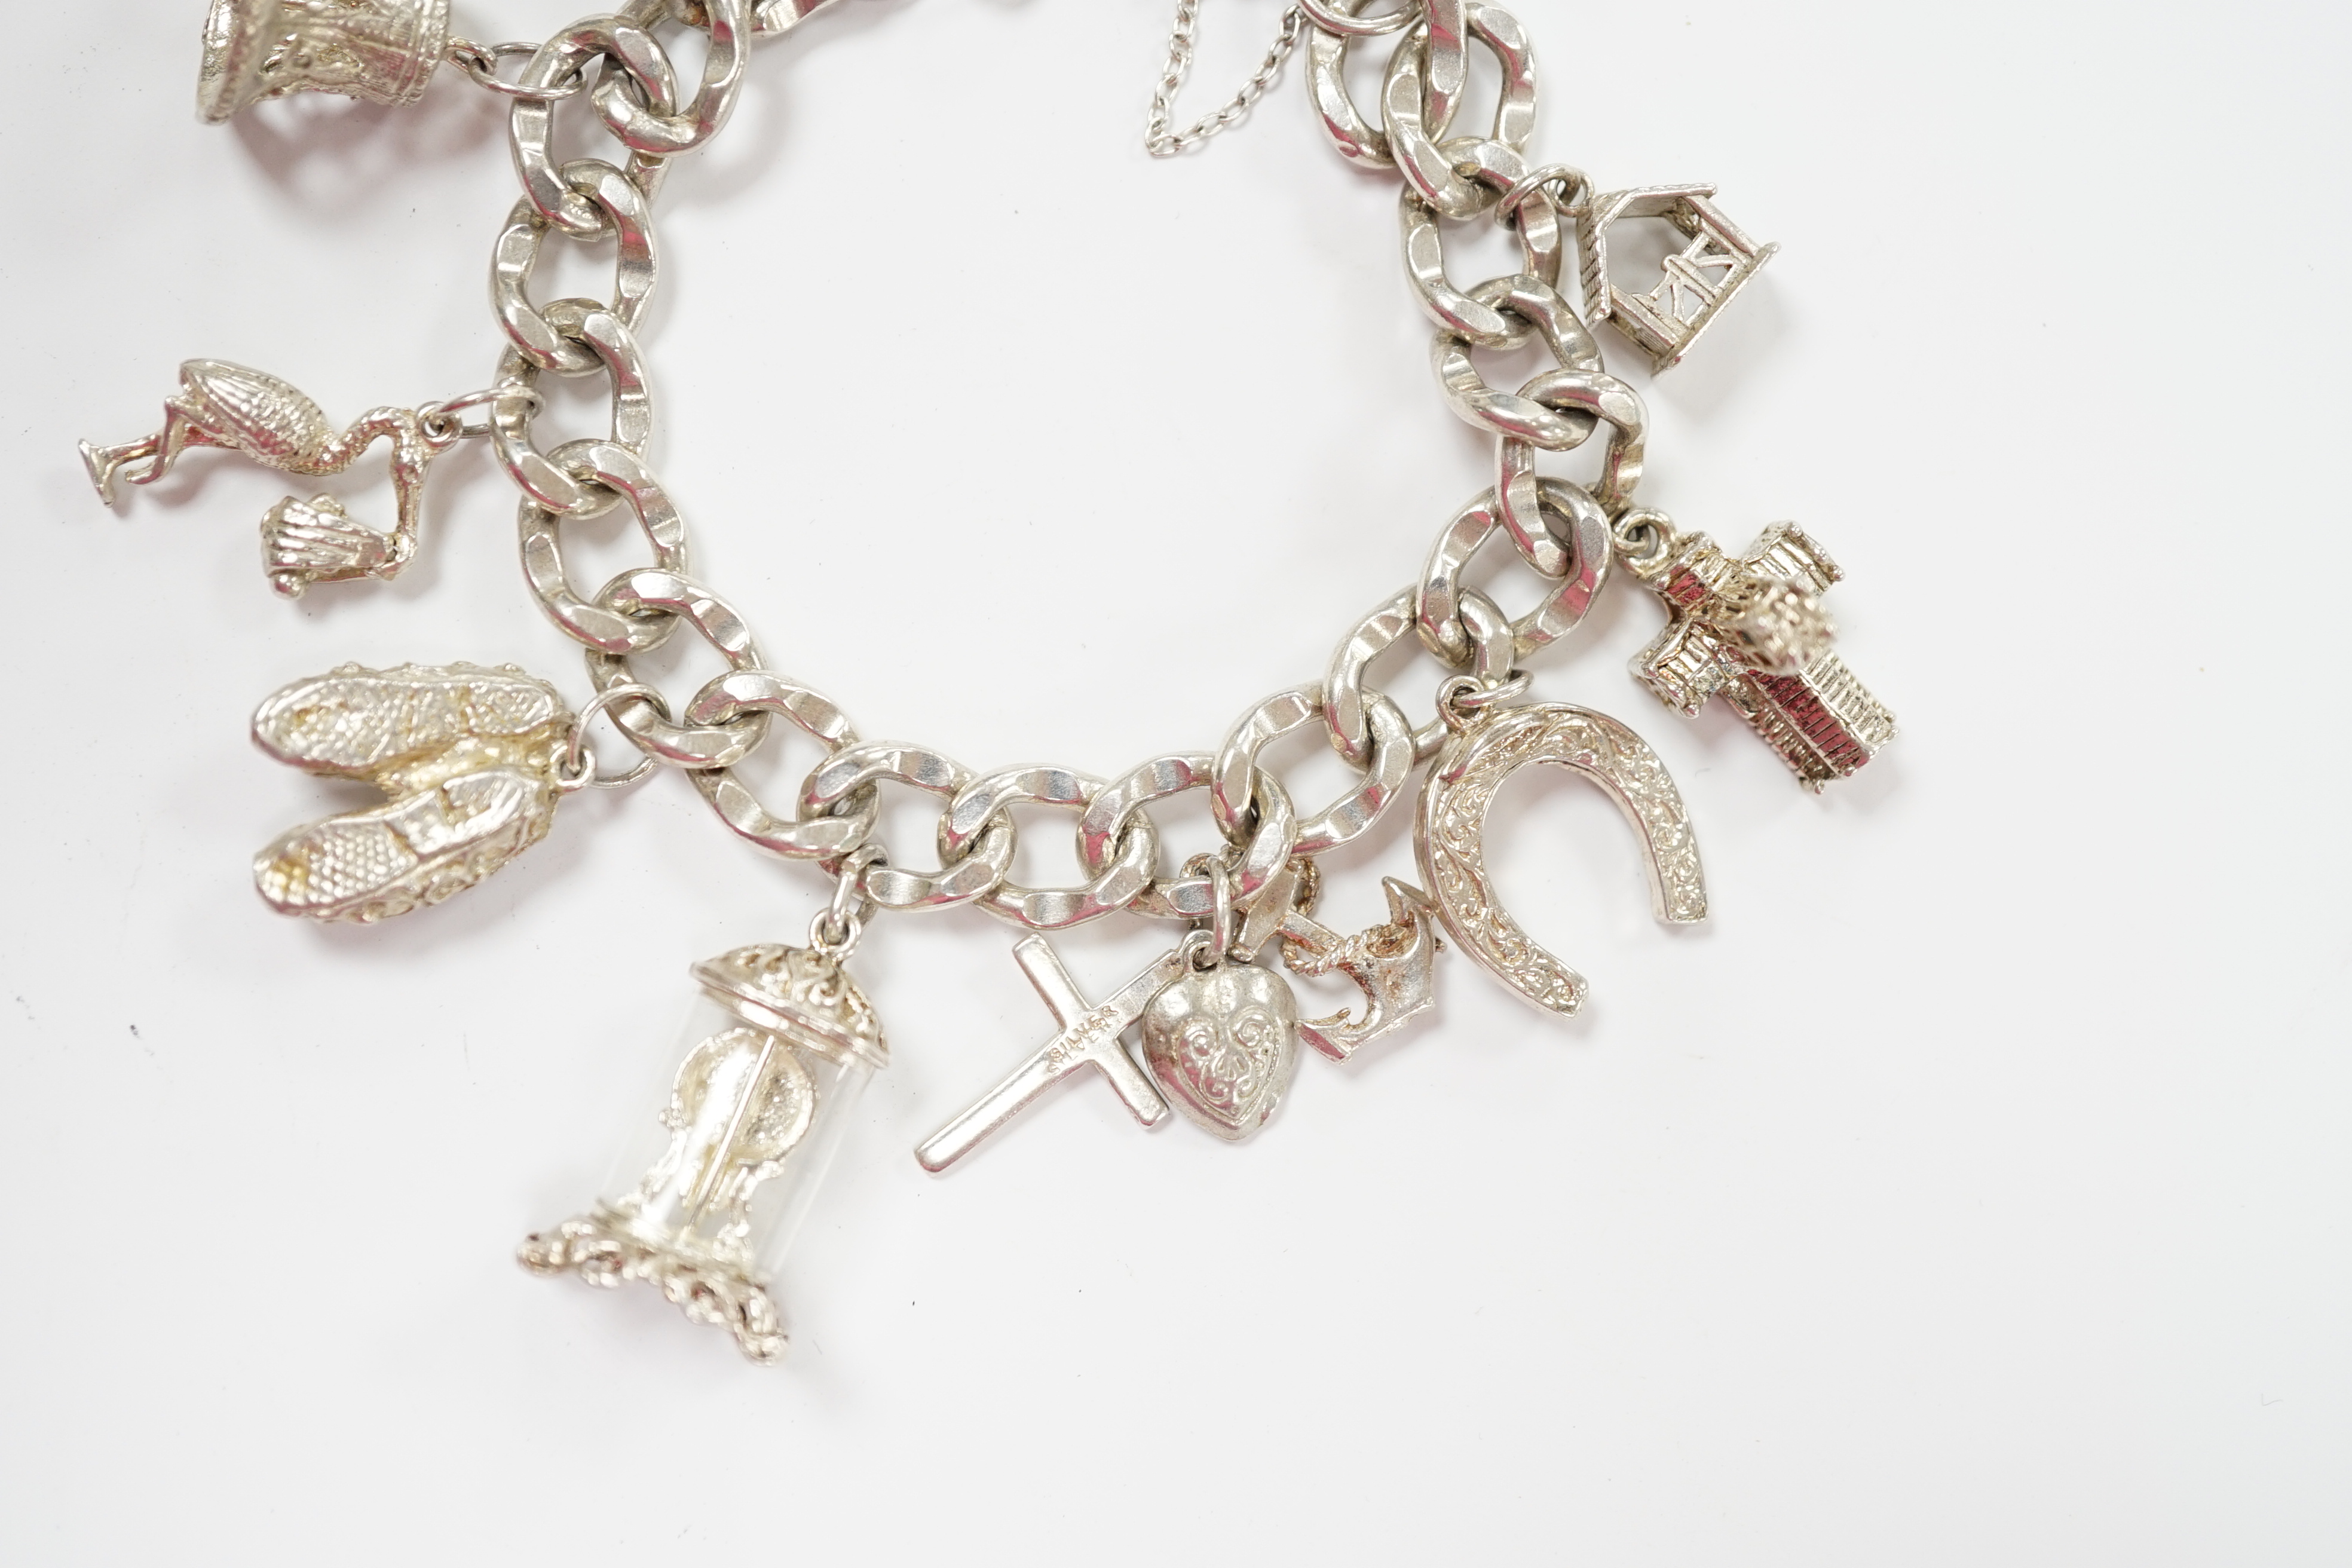 A modern silver charm bracelet, hung with nine assorted charms.